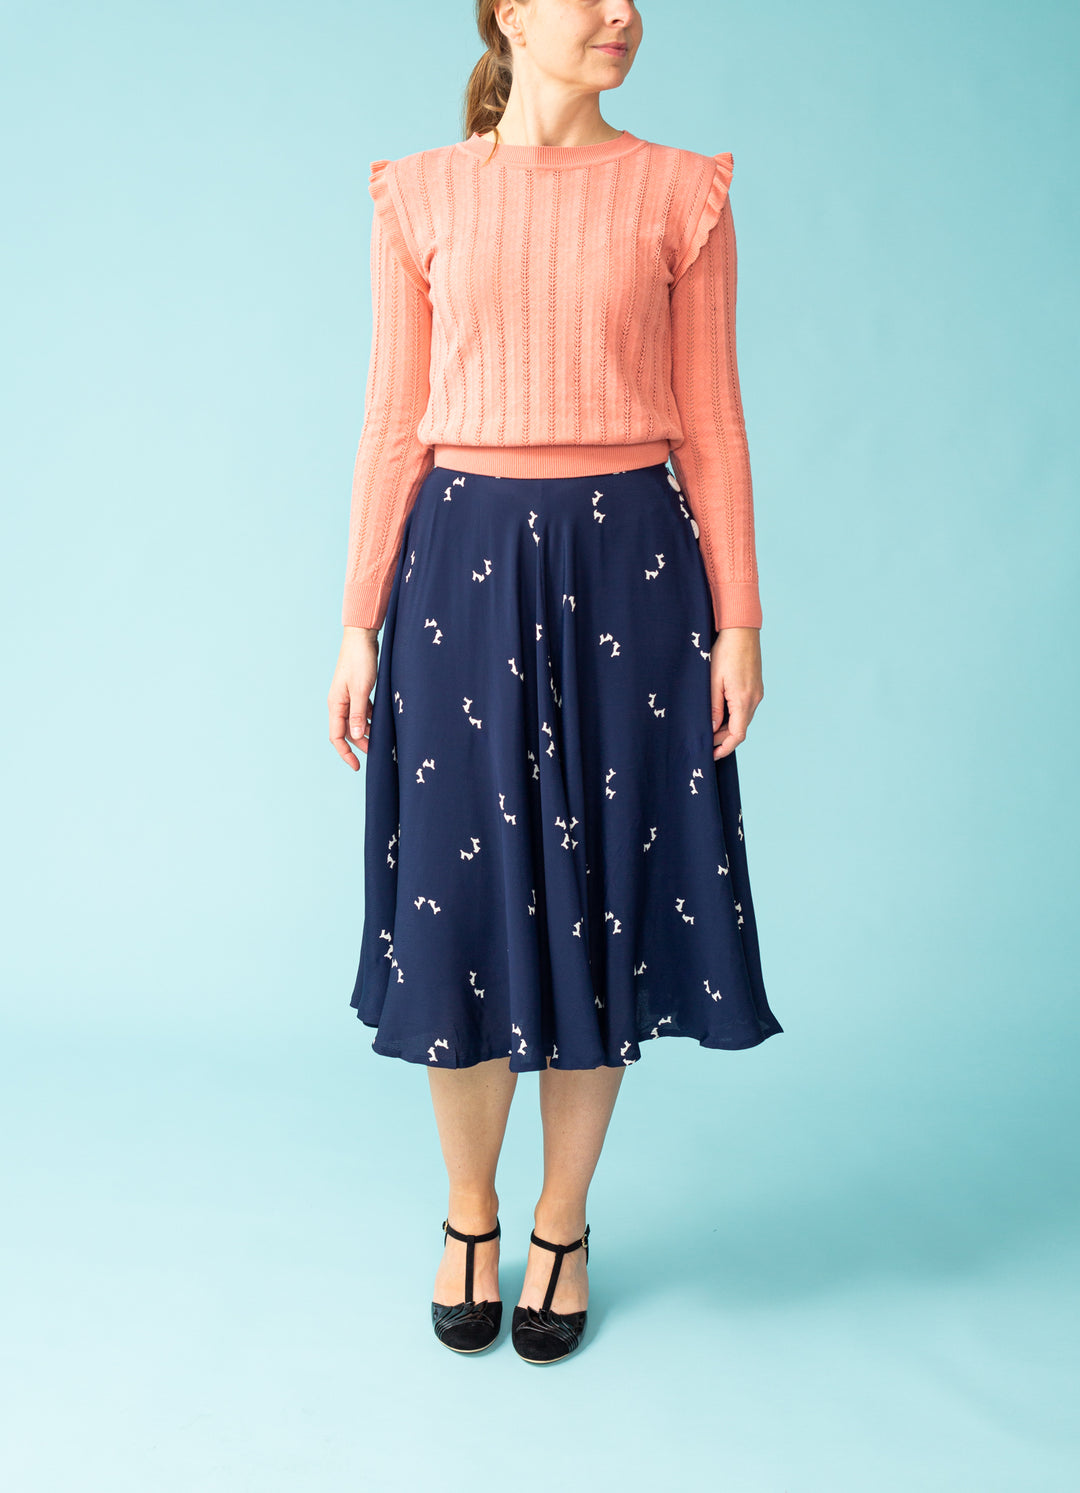 Swing skirt with white buttons - navy/white dogs